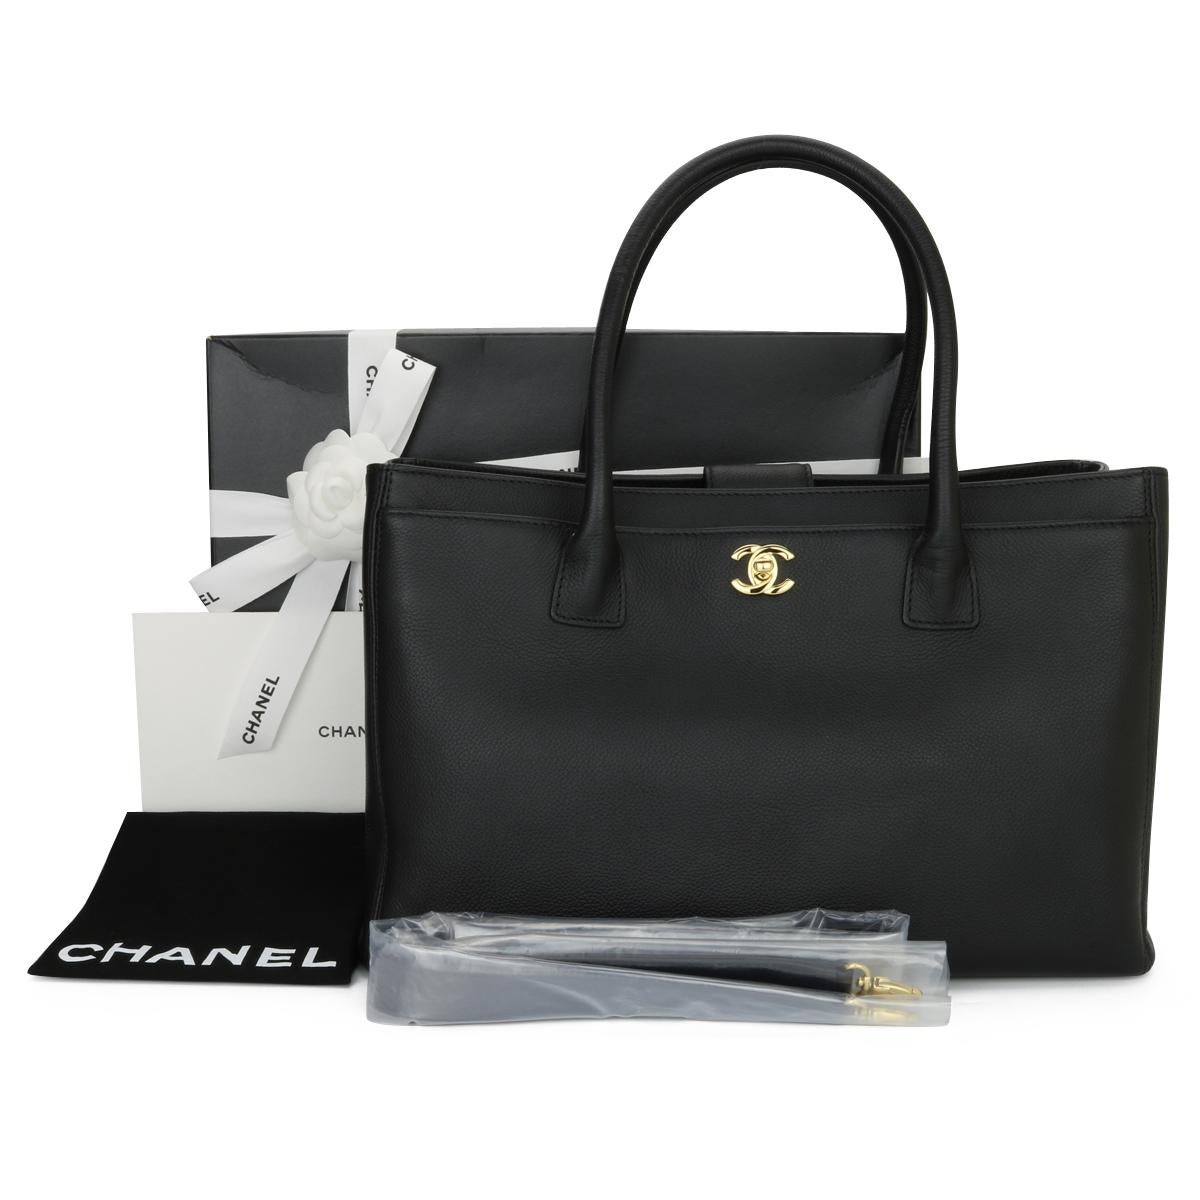 CHANEL Executive Cerf Tote Black Calfskin with Gold Hardware 2013.

This bag is in excellent condition, the bag still holds its original shape, and the hardware is still very shiny.

Such a multi-functional bag, which can be worn both as a shoulder